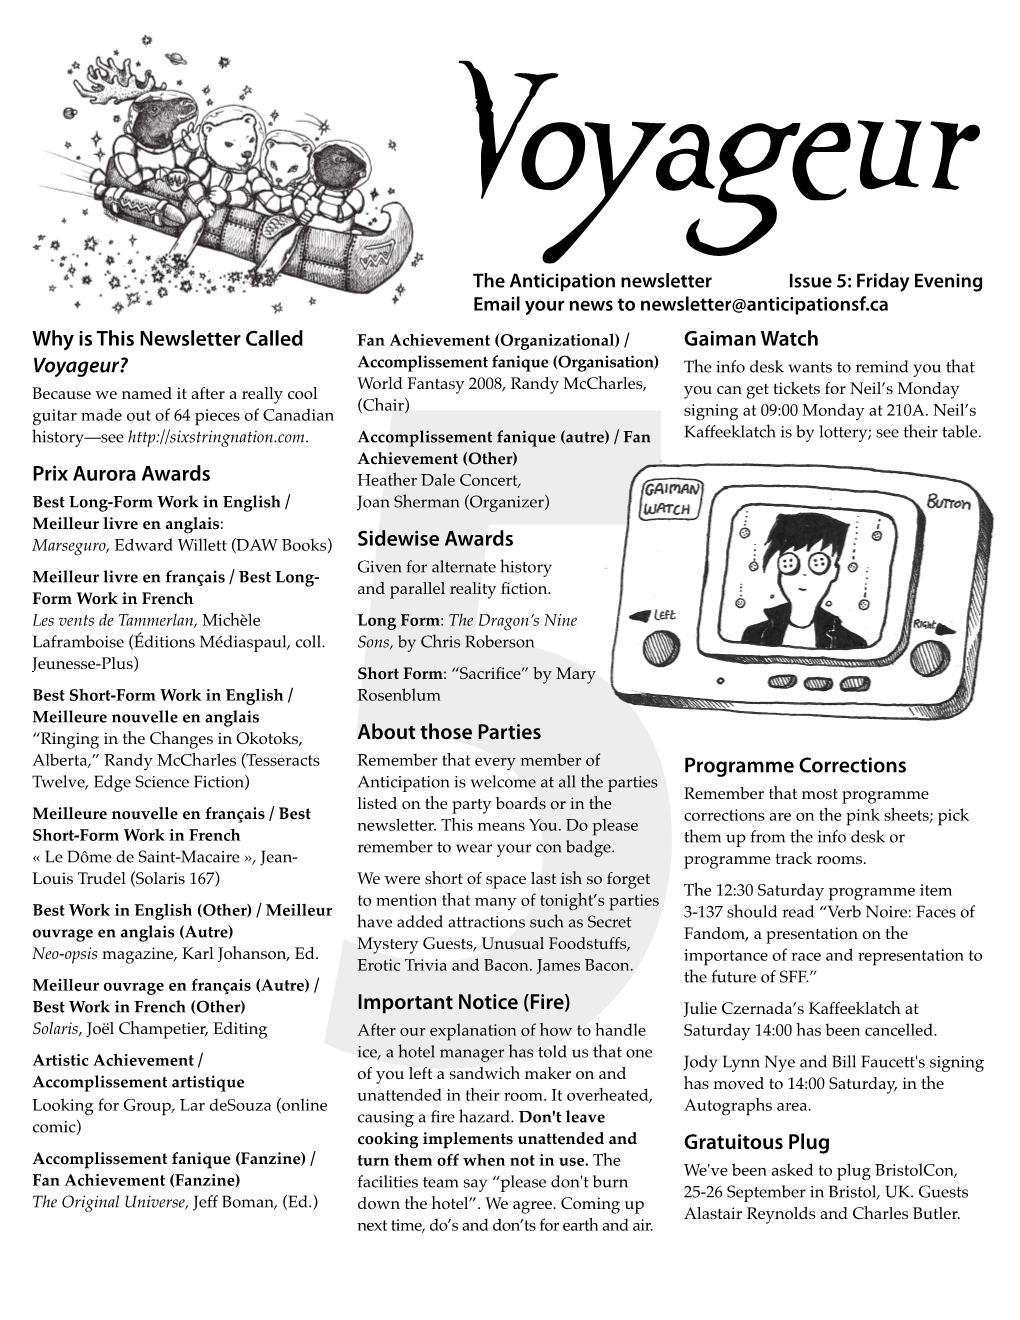 Voyageur the Anticipation Newsletter Issue 5: Friday Evening Email Your News to Newsletter@Anticipationsf.Ca